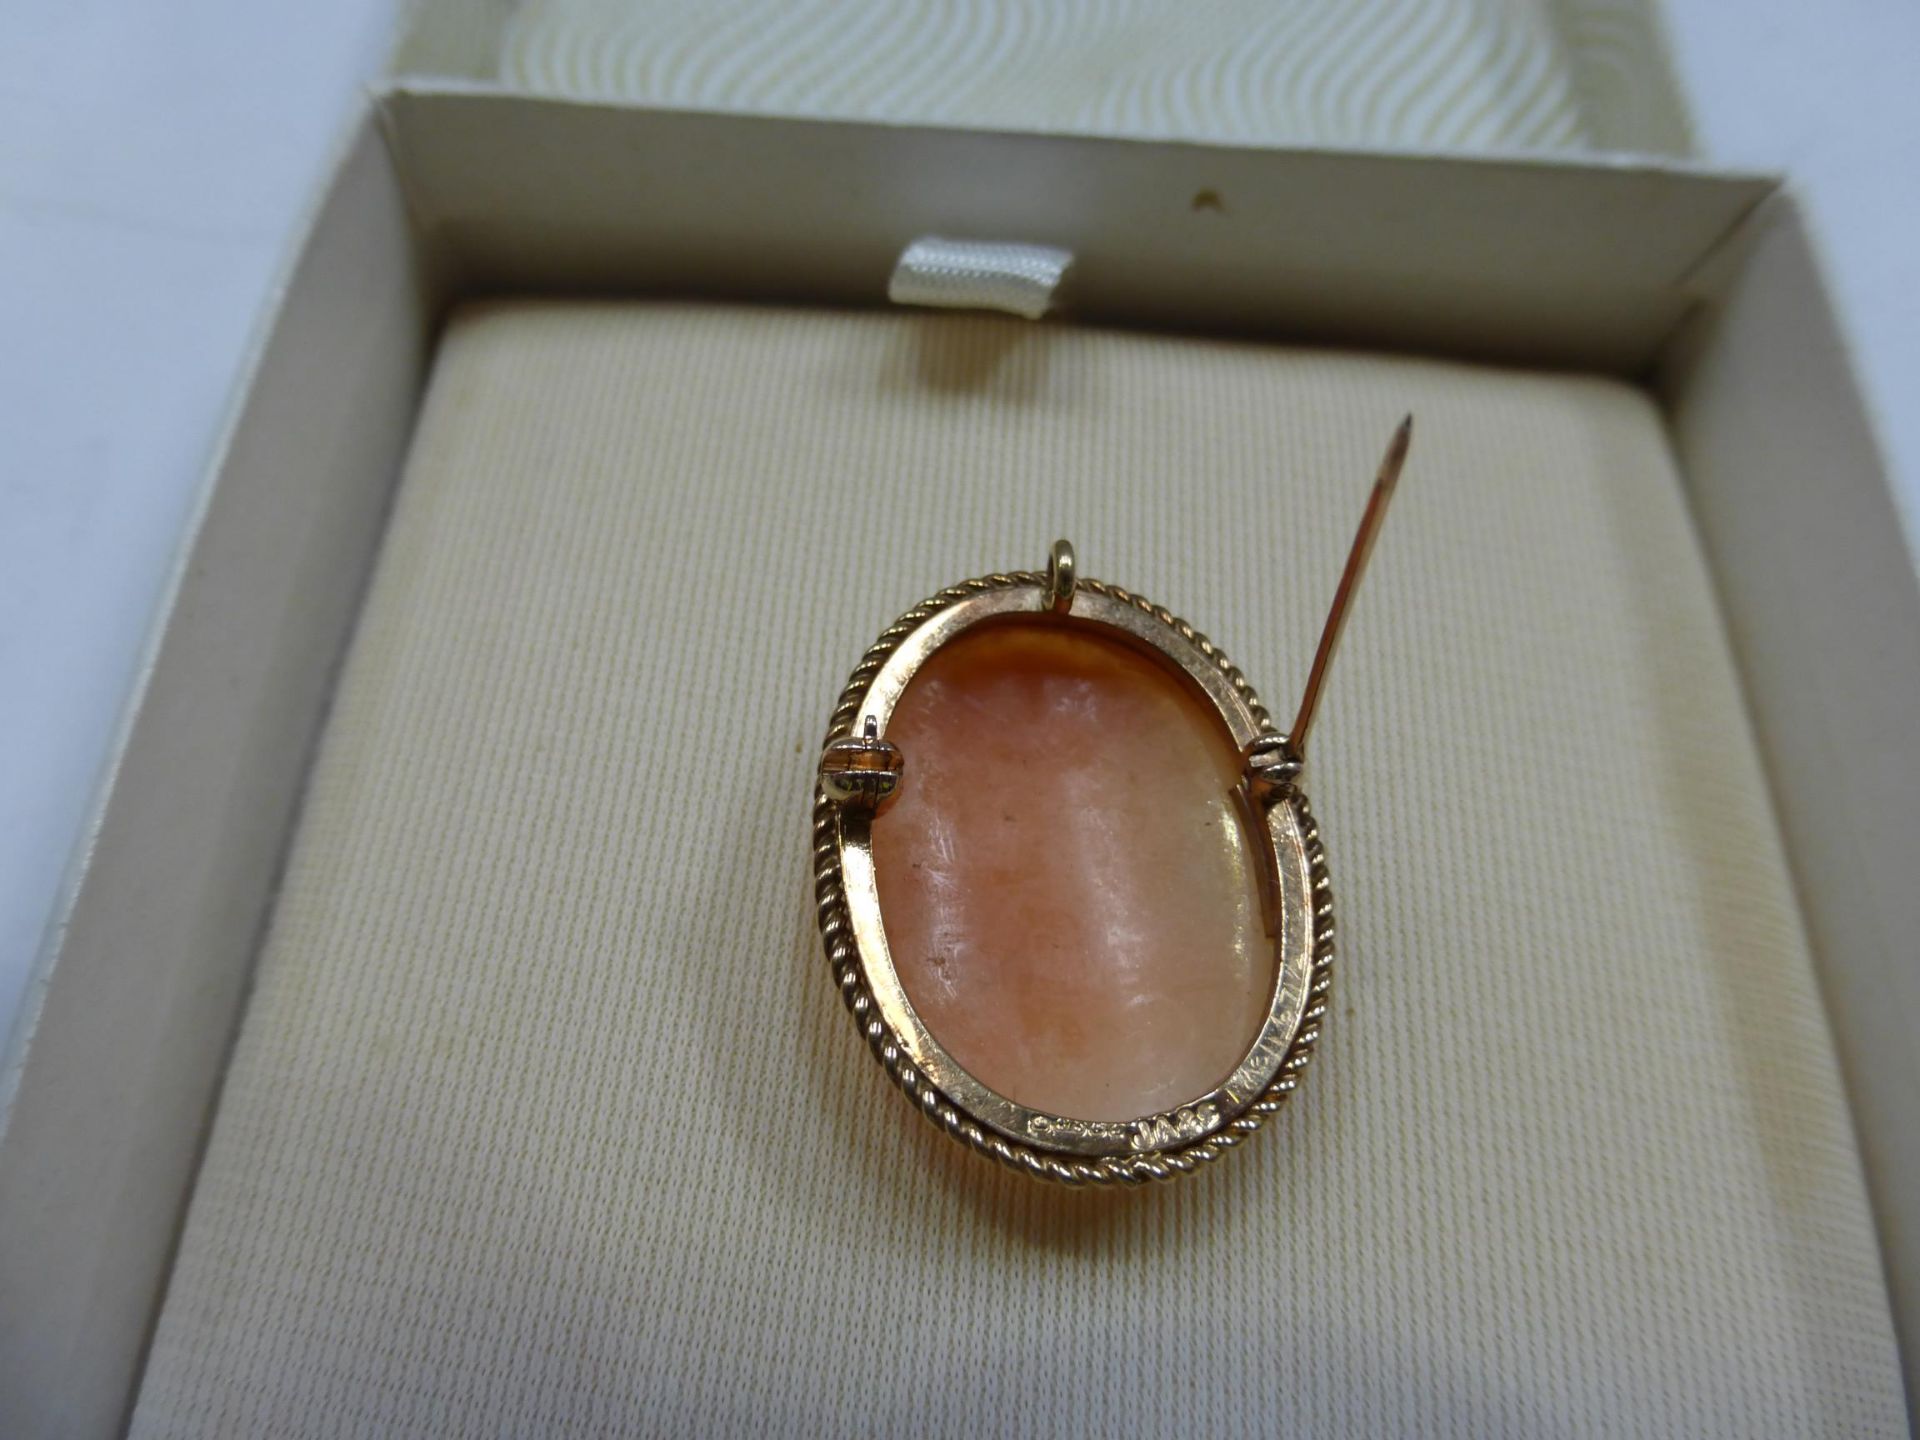 A 9ct Gold mounted carved Cameo Pendant Brooch, hallmarked (est. £25-£40) - Image 3 of 4